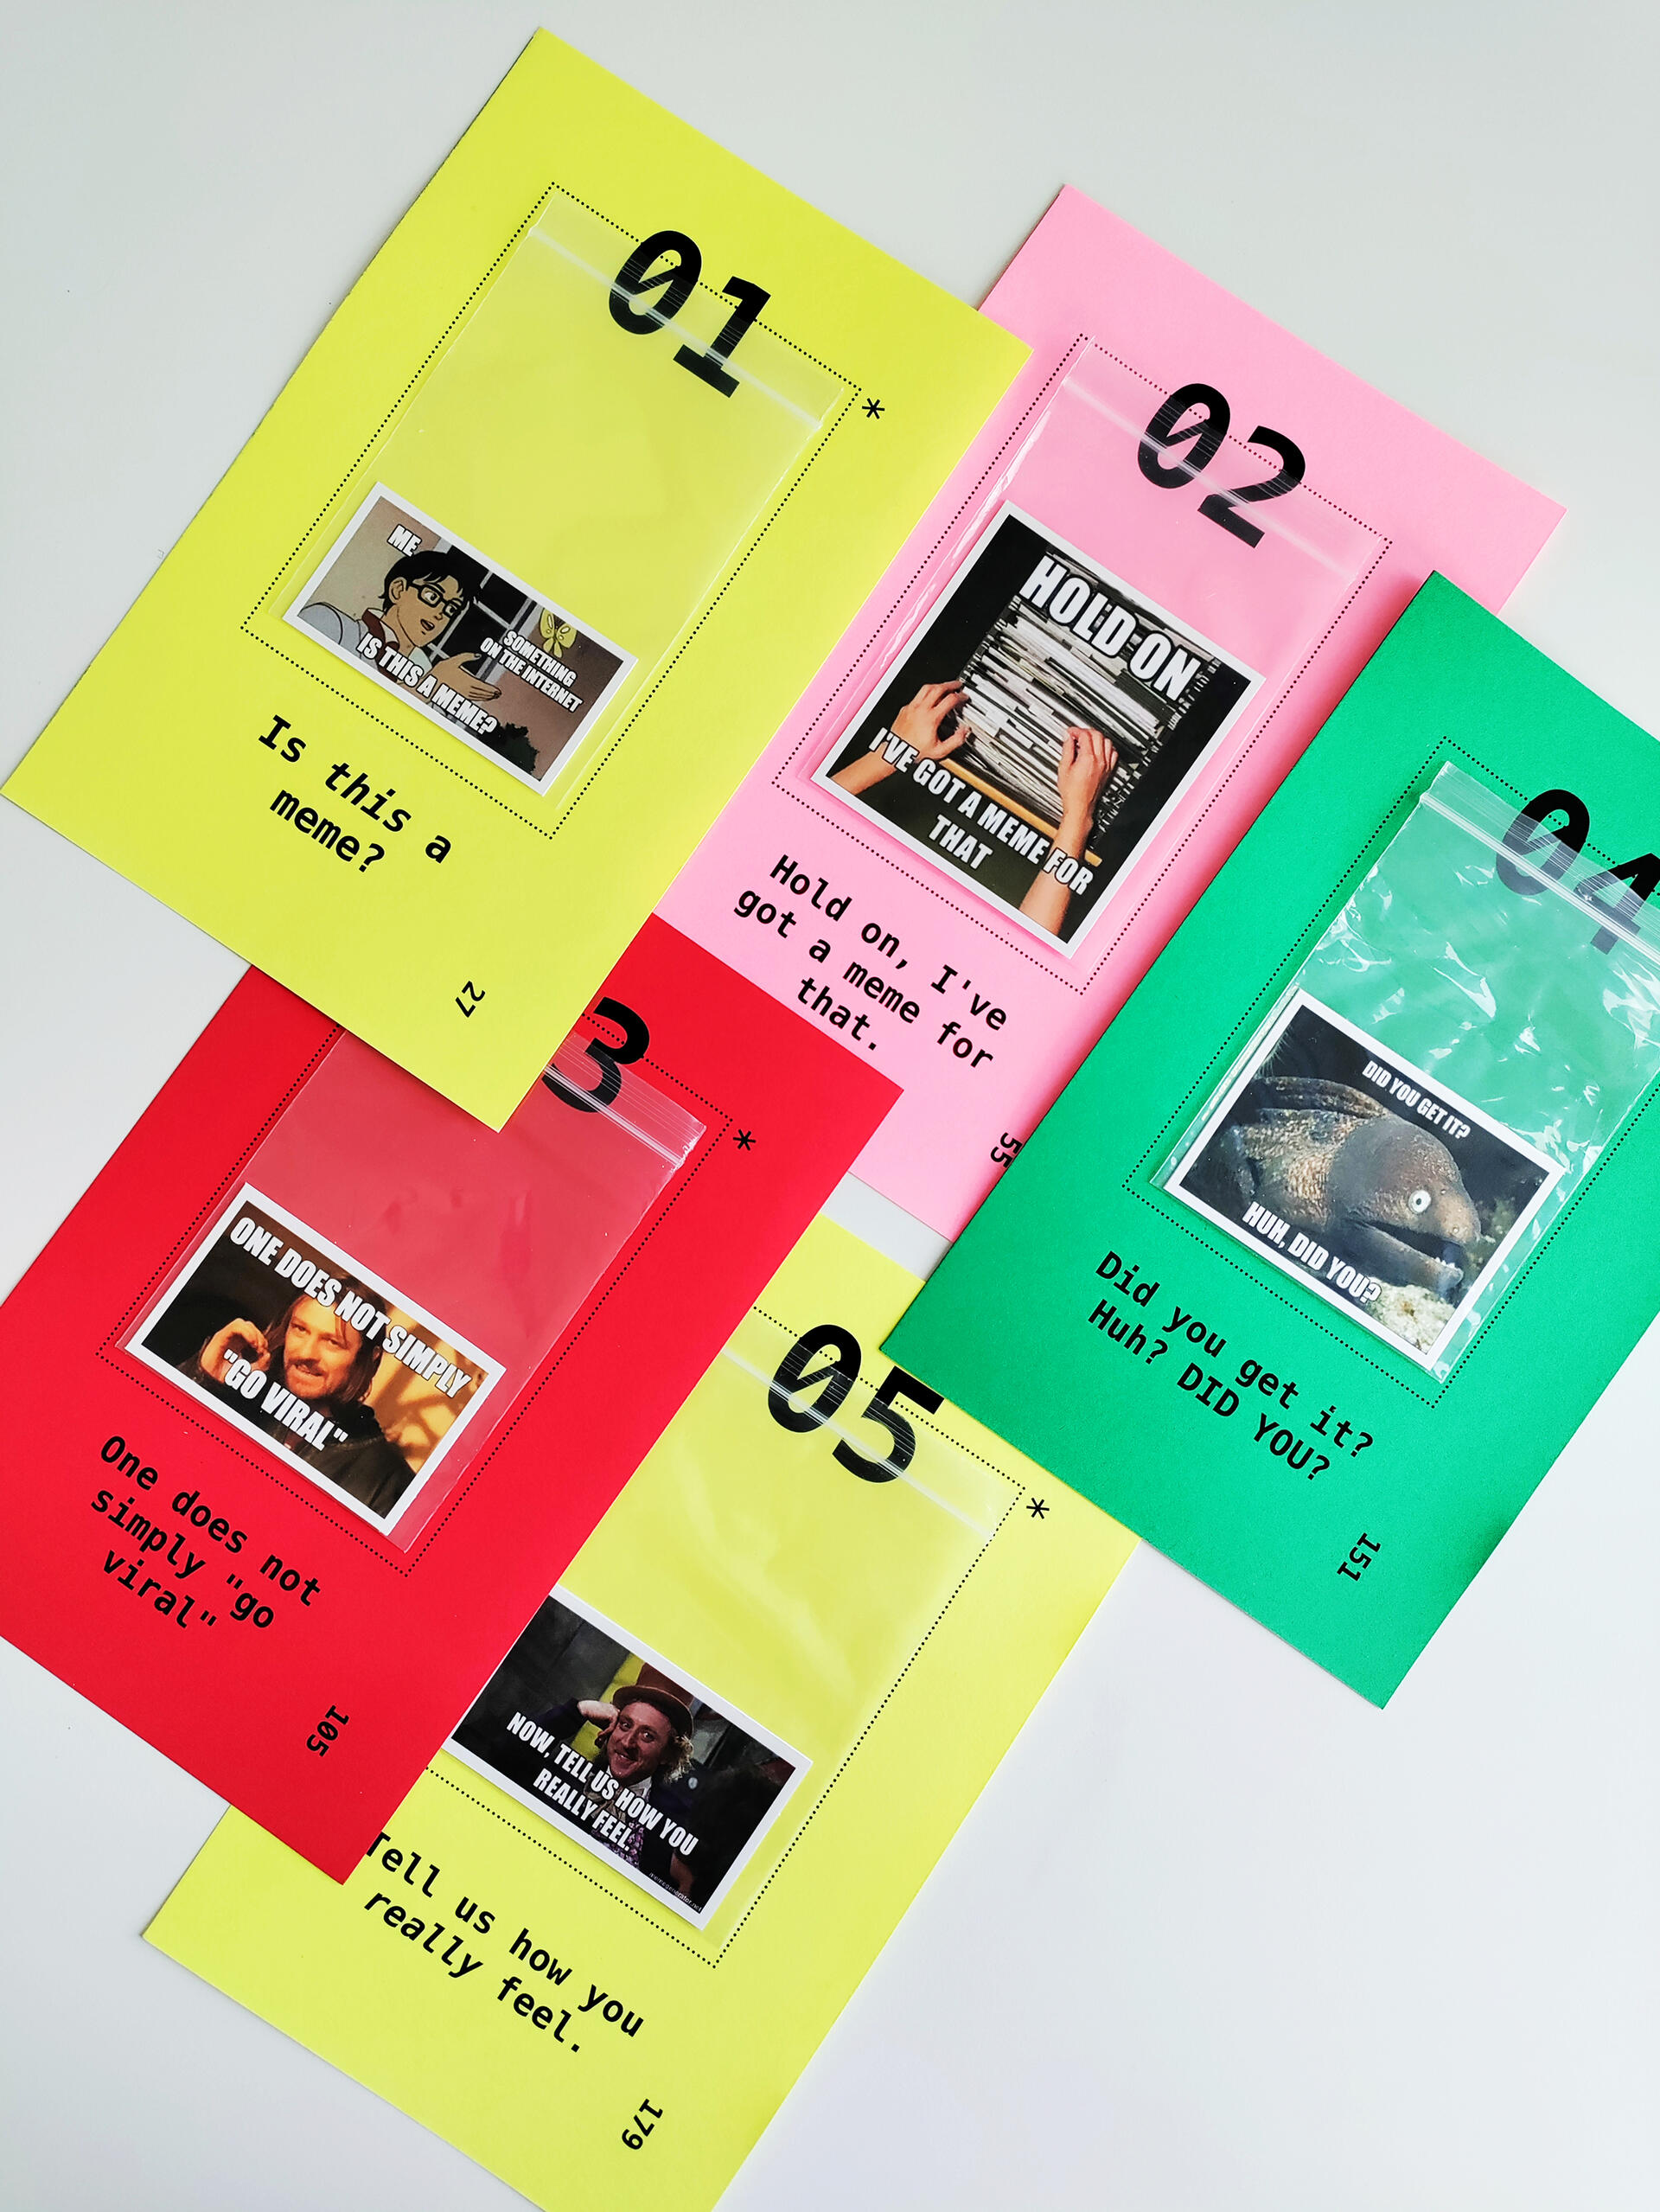 Five colorful loose pages printed with chapter numbers and titles. Each page has a ziploc bag attached to it, inside which is a printout of an internet meme. 